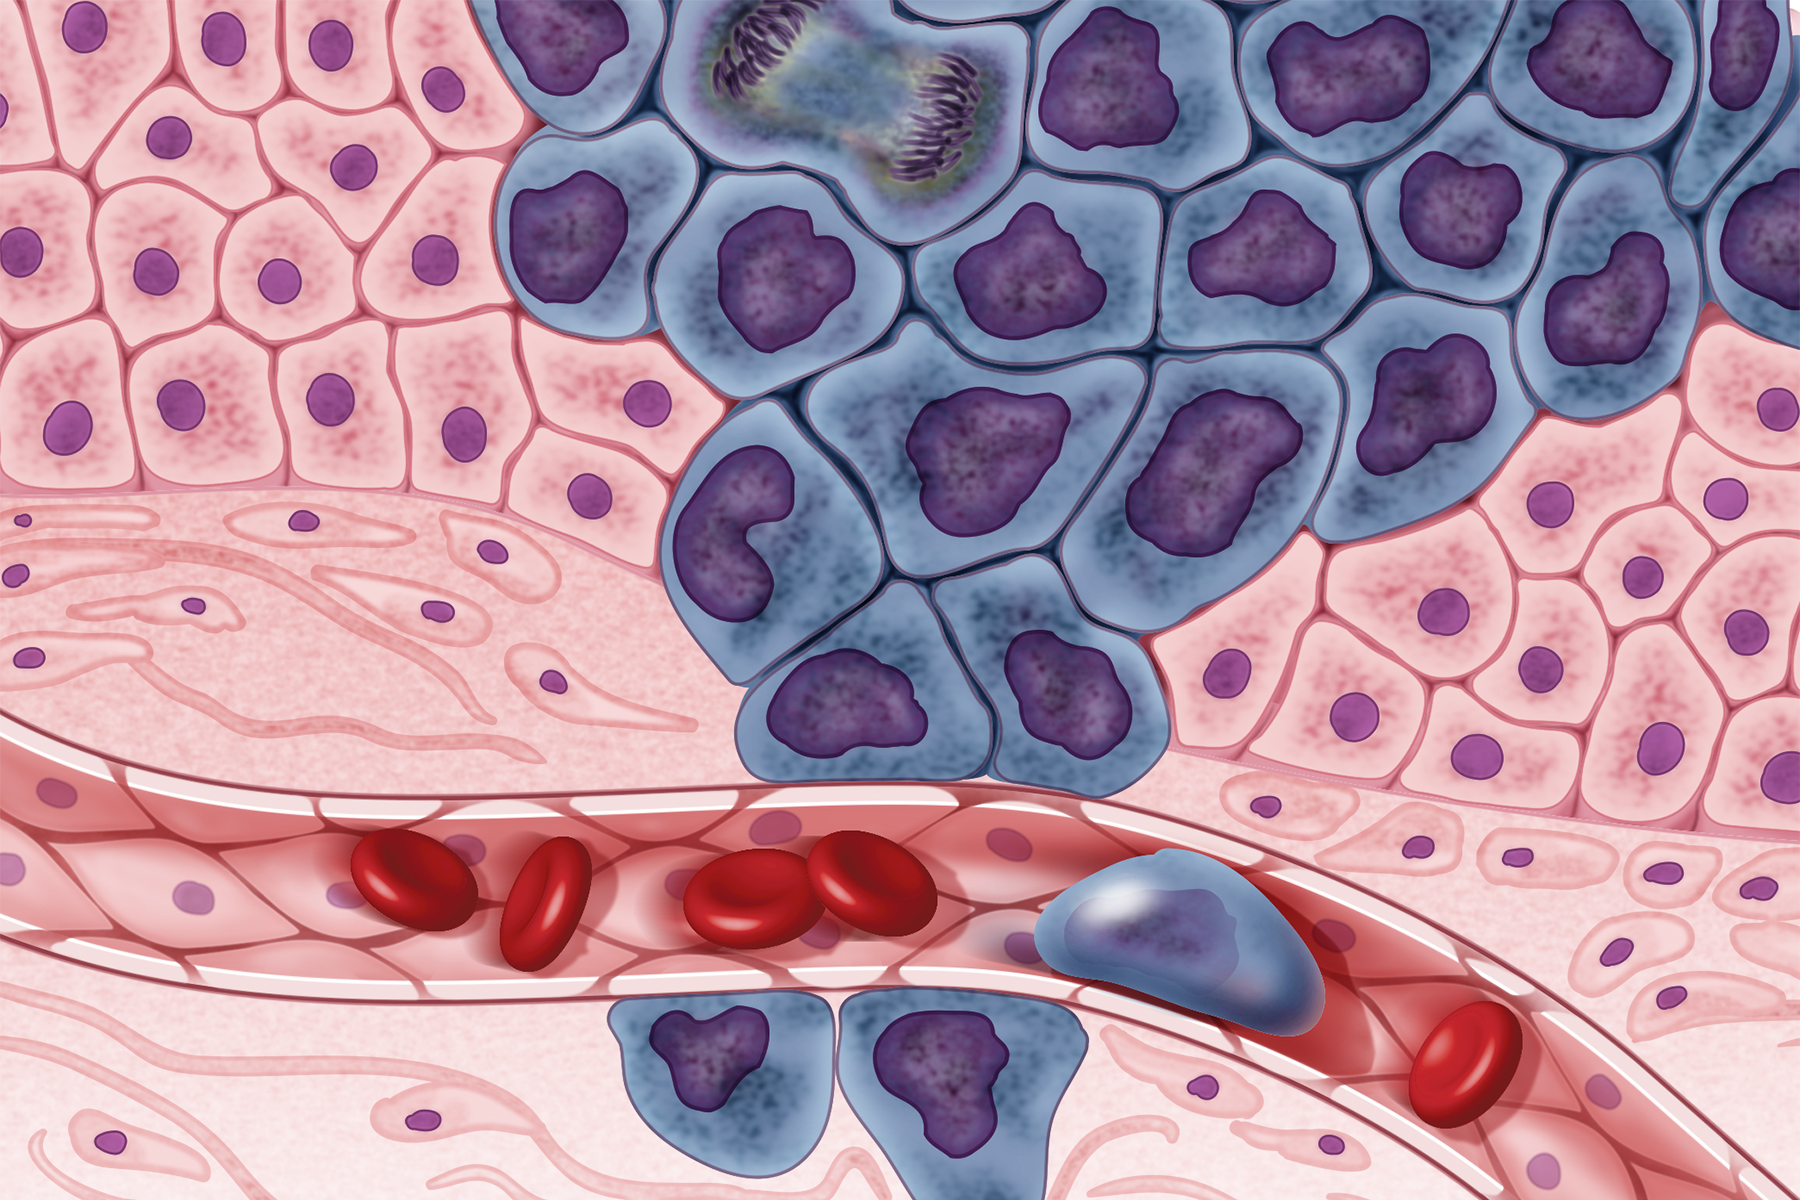 Illustration of cancerous cells entering the circulatory system